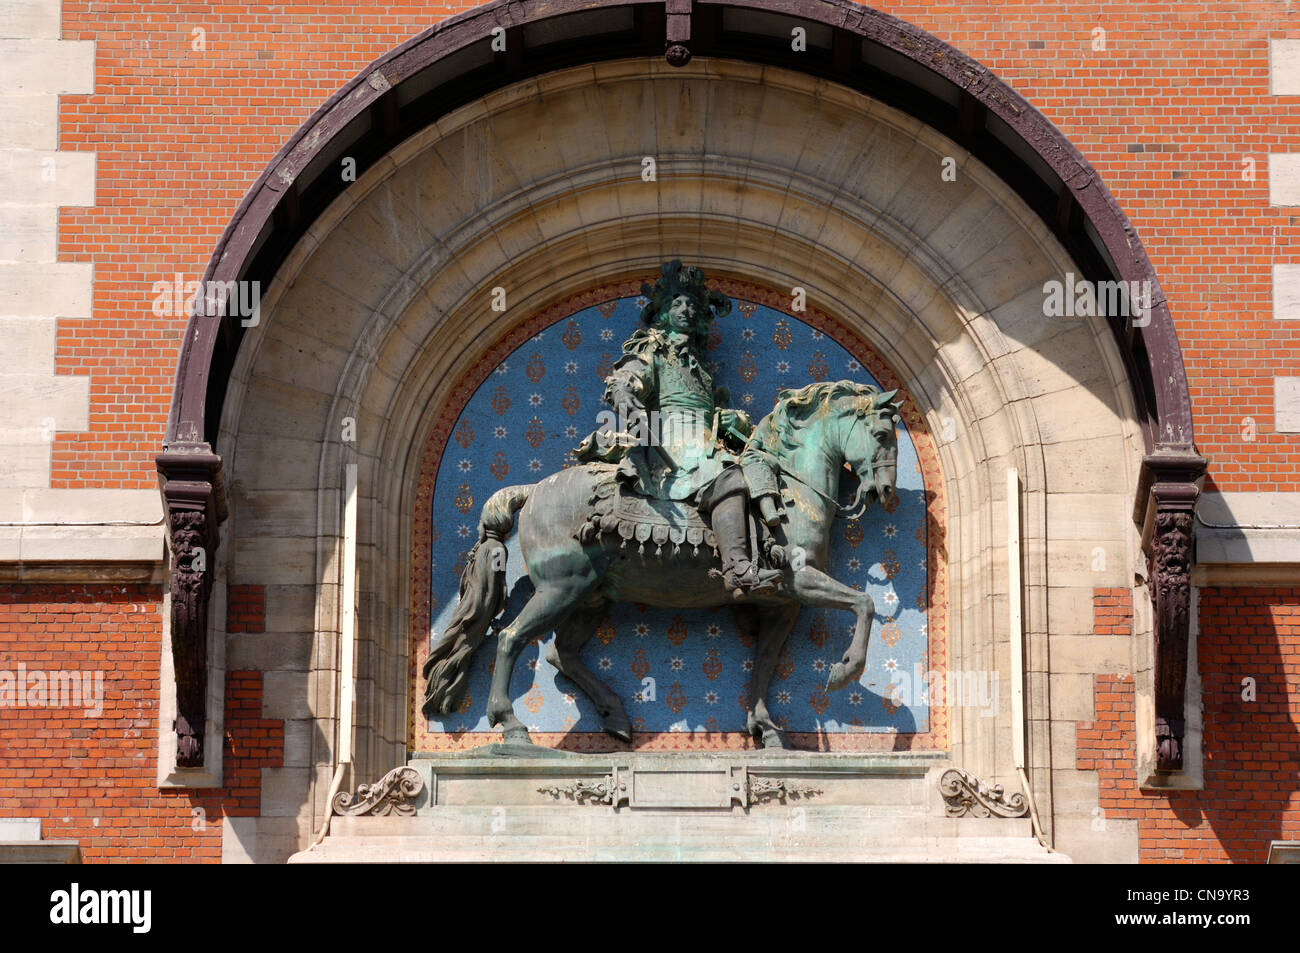 France, Nord, Dunkirk, town hall, sculpture of Louis 14 Louis XIV king of France on his horse in front of the city of Dunkirk Stock Photo